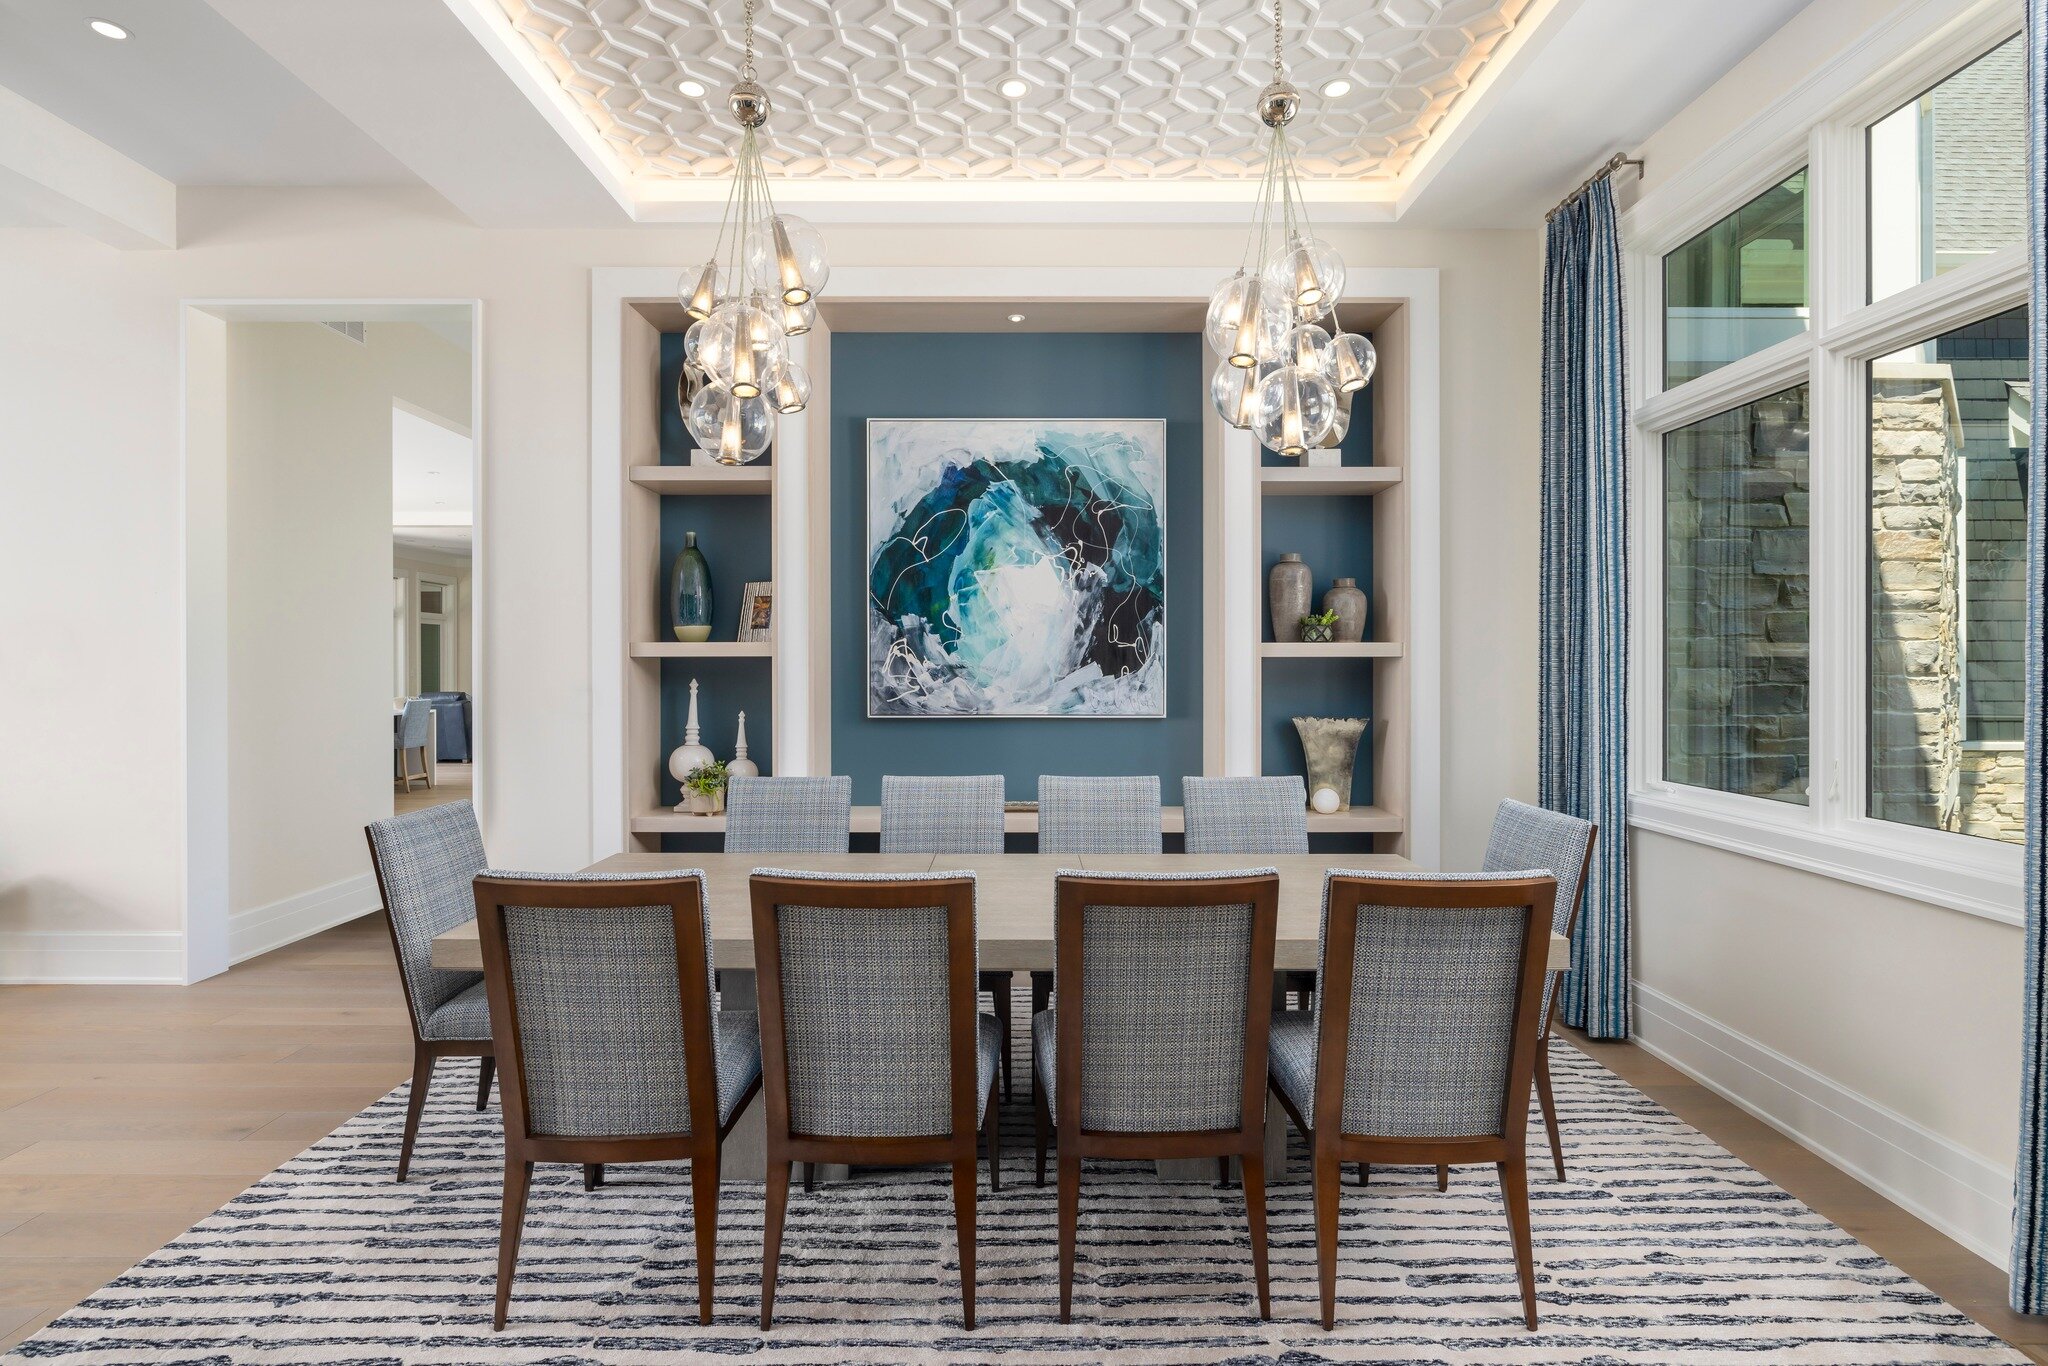 The dining room from one of our recently completed projects, #msbLakeEstate. 
What better place to enjoy a fine dinner with friends and family than a beautiful and inspiring dining room?

Builder: @mikeschaapbuilders 
Photo: @danzeeff 

#benchmarkdes